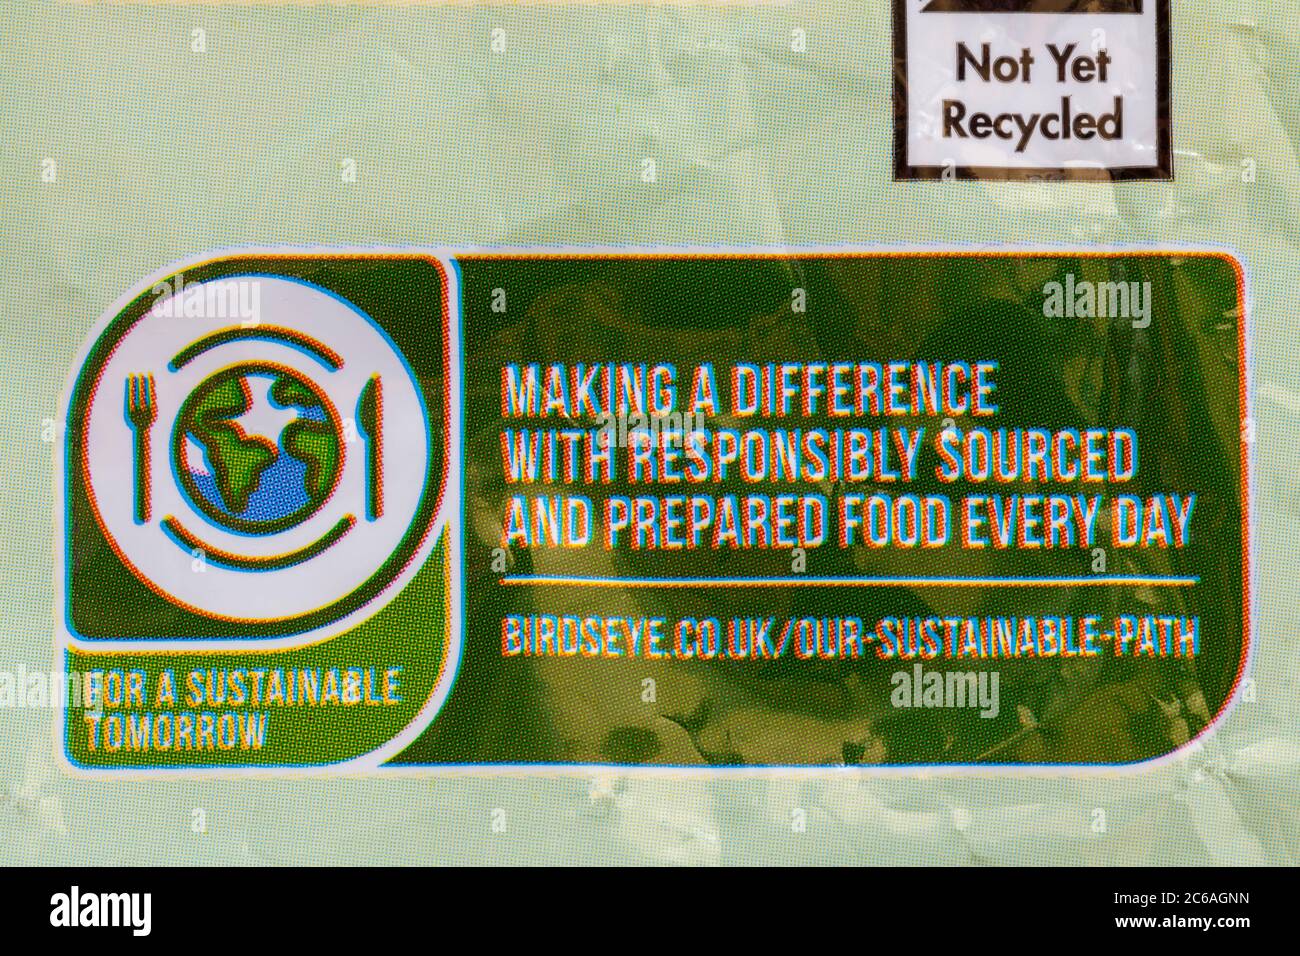 making a difference with responsibly sourced and prepared food every day for a sustainable tomorrow - detail on bag of Birds Eye frozen mixed veg Stock Photo